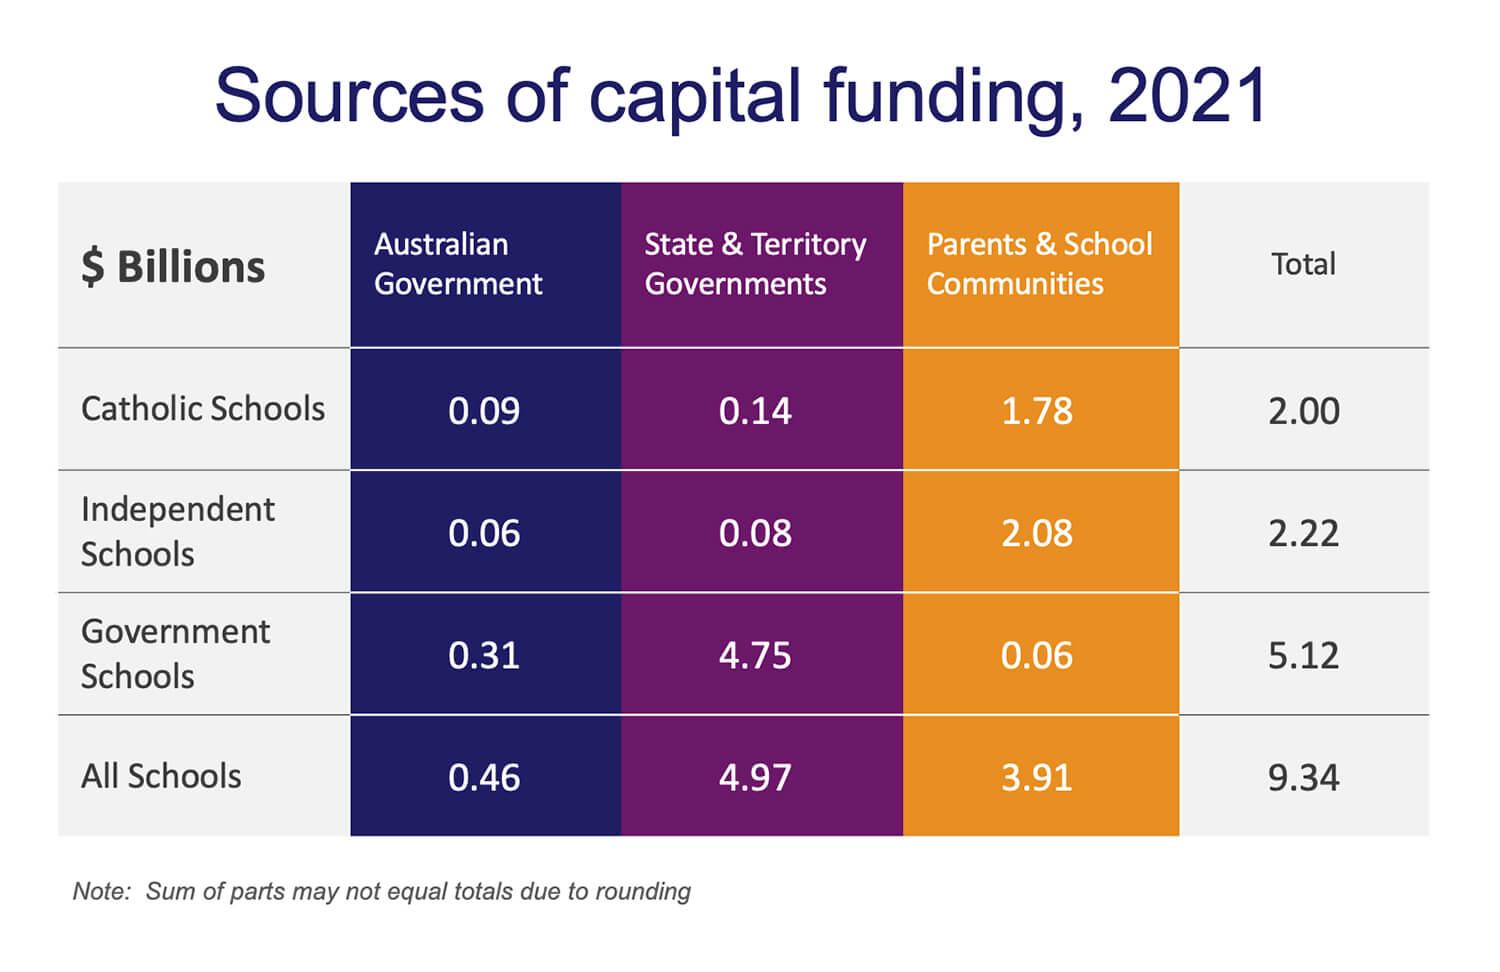 Sources of capital funding